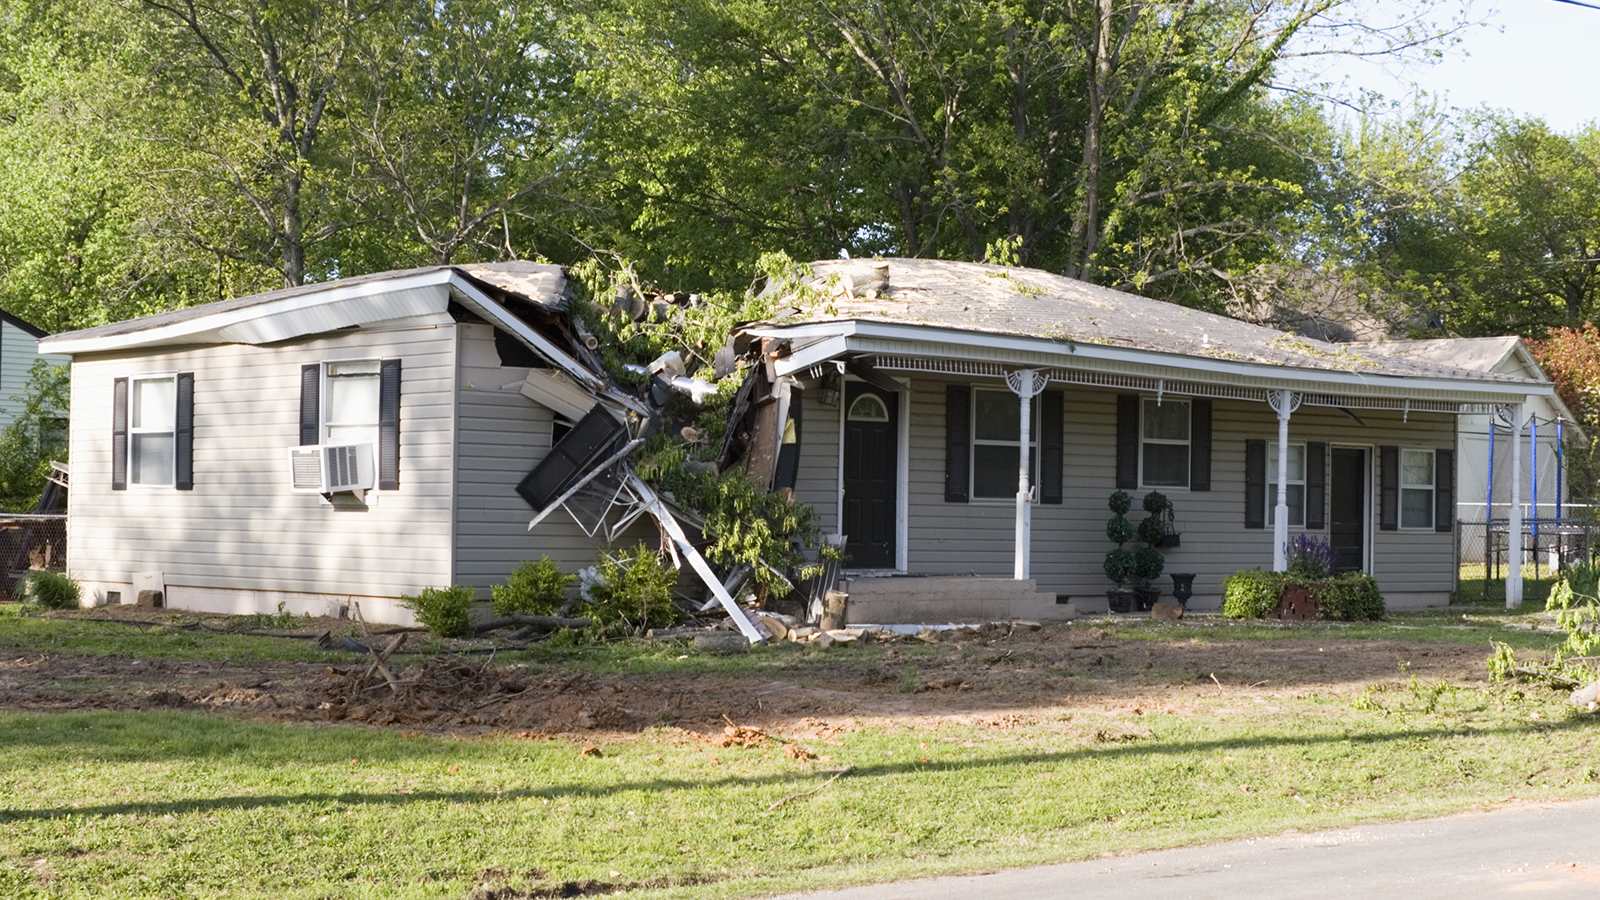 House damaged by storm